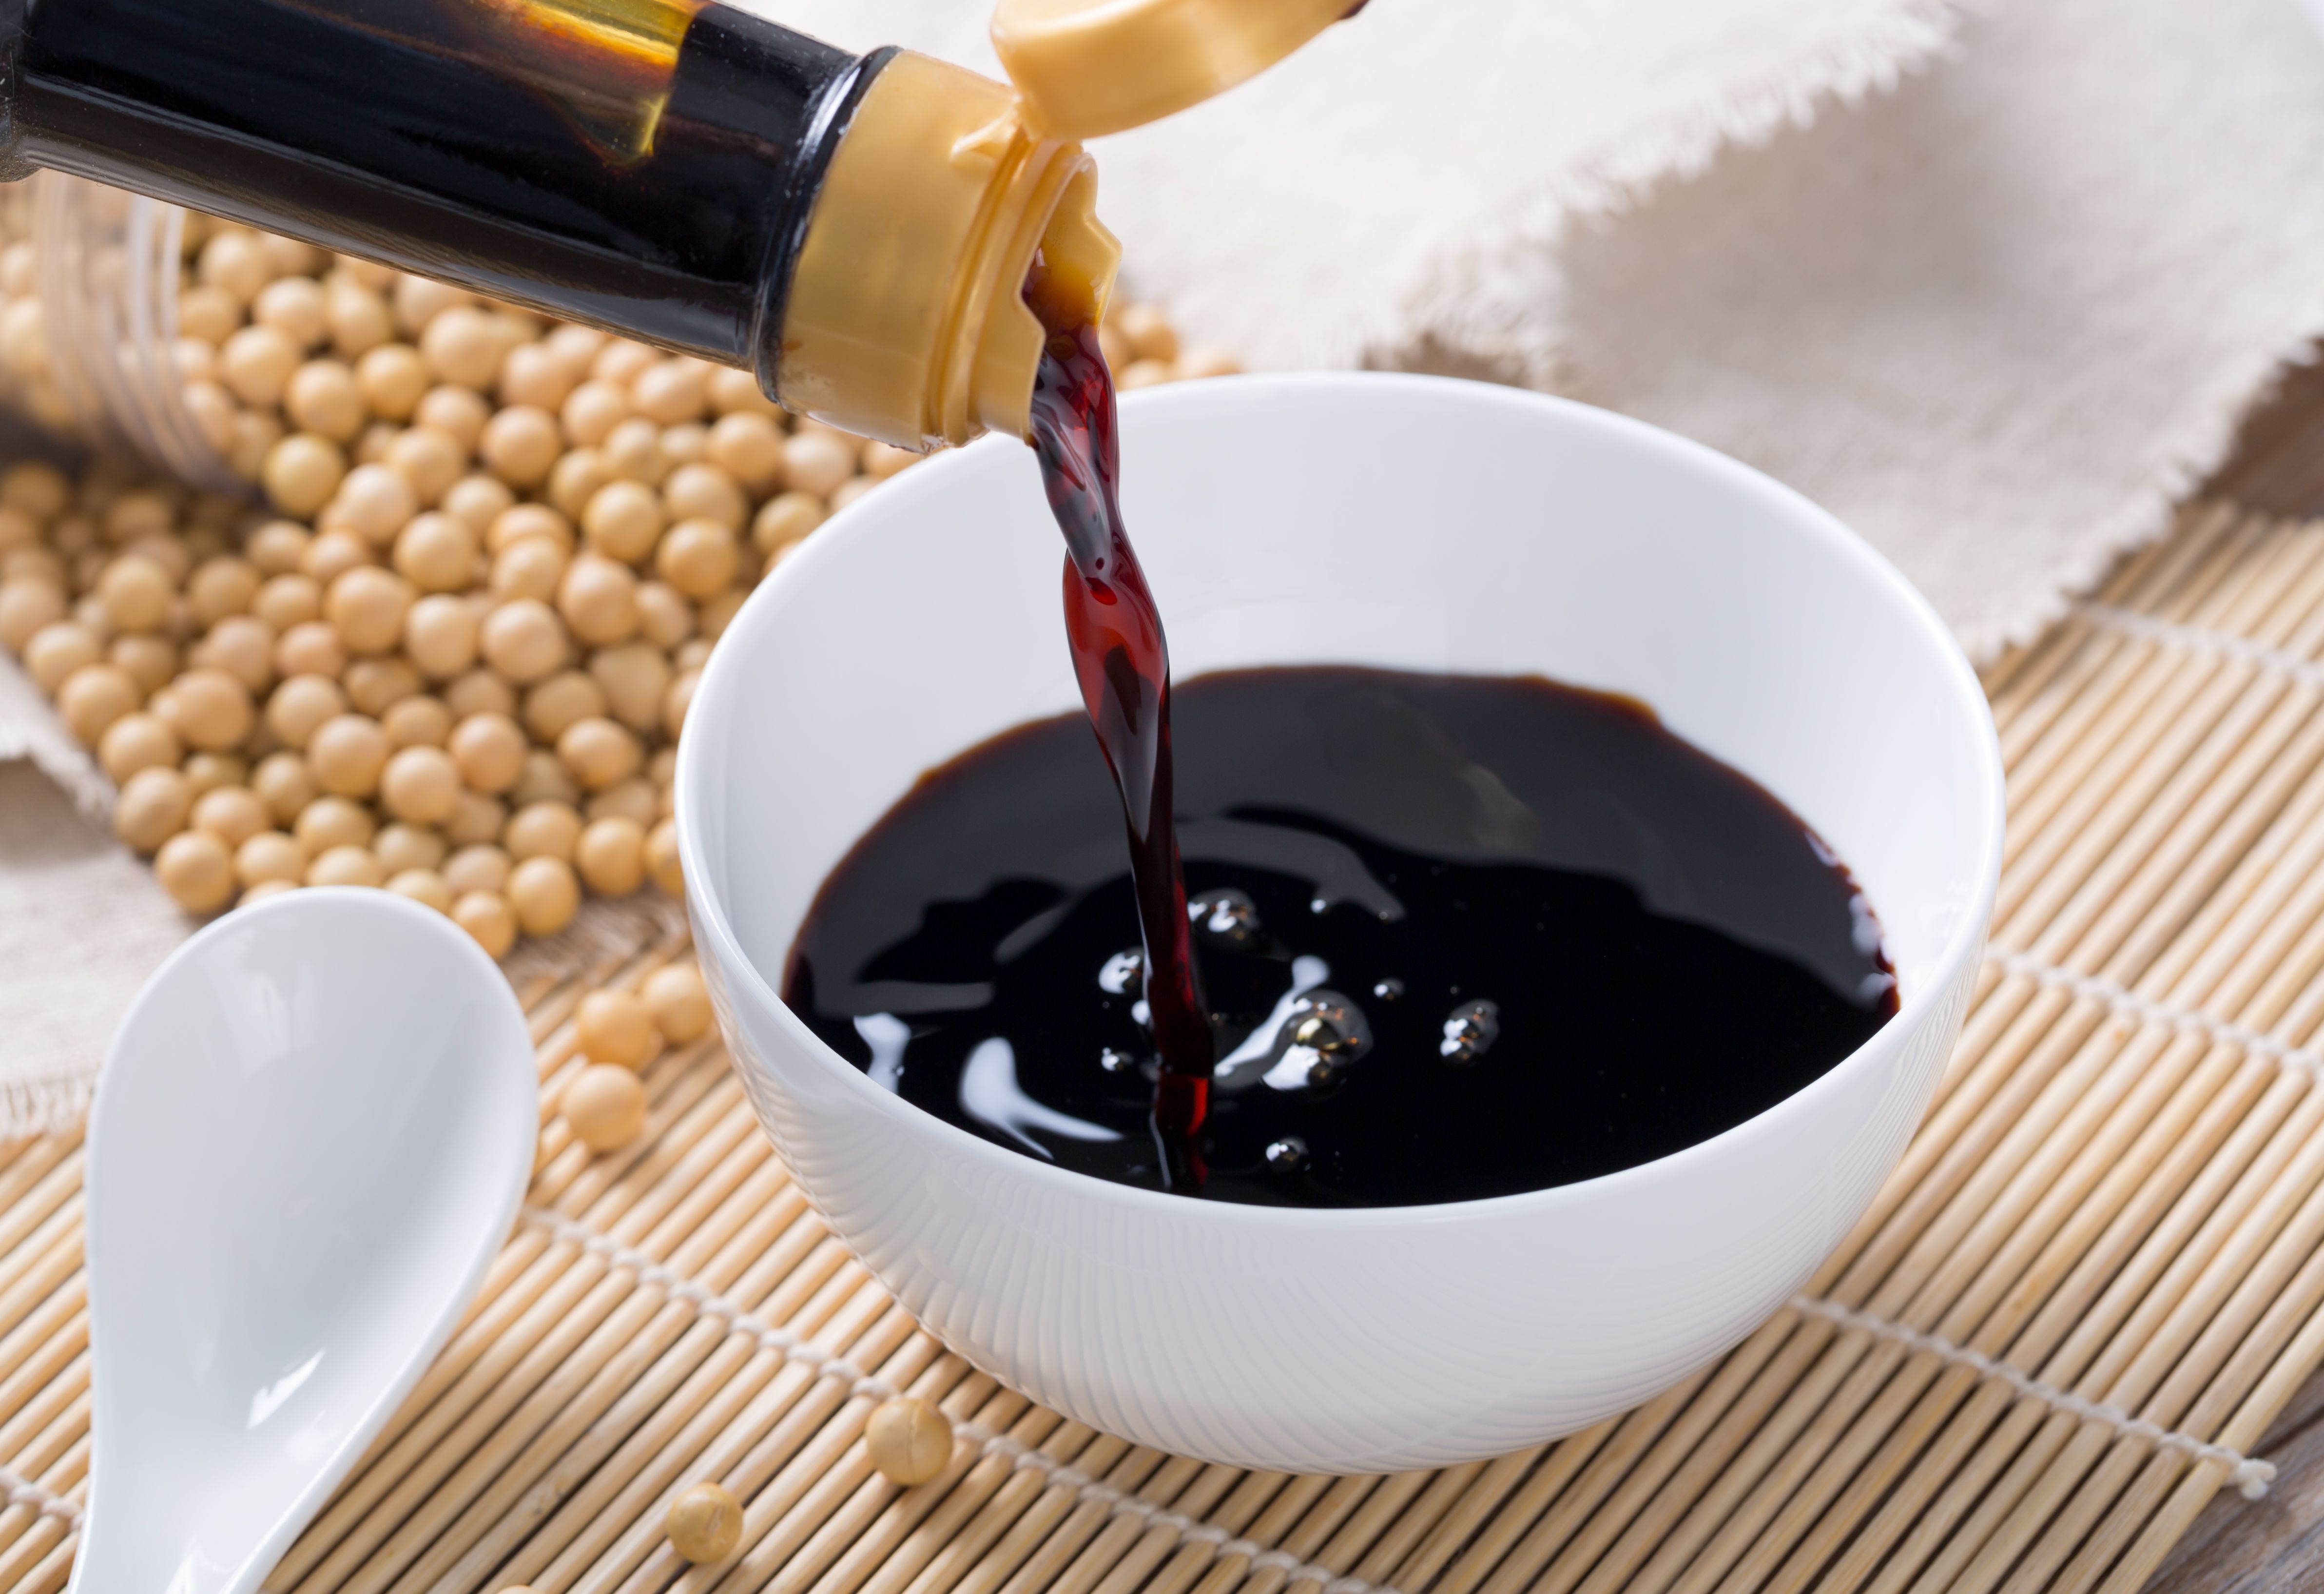 https://hips.hearstapps.com/hmg-prod/images/pouring-soy-sauce-into-a-white-bowl-royalty-free-image-1600976187.jpg